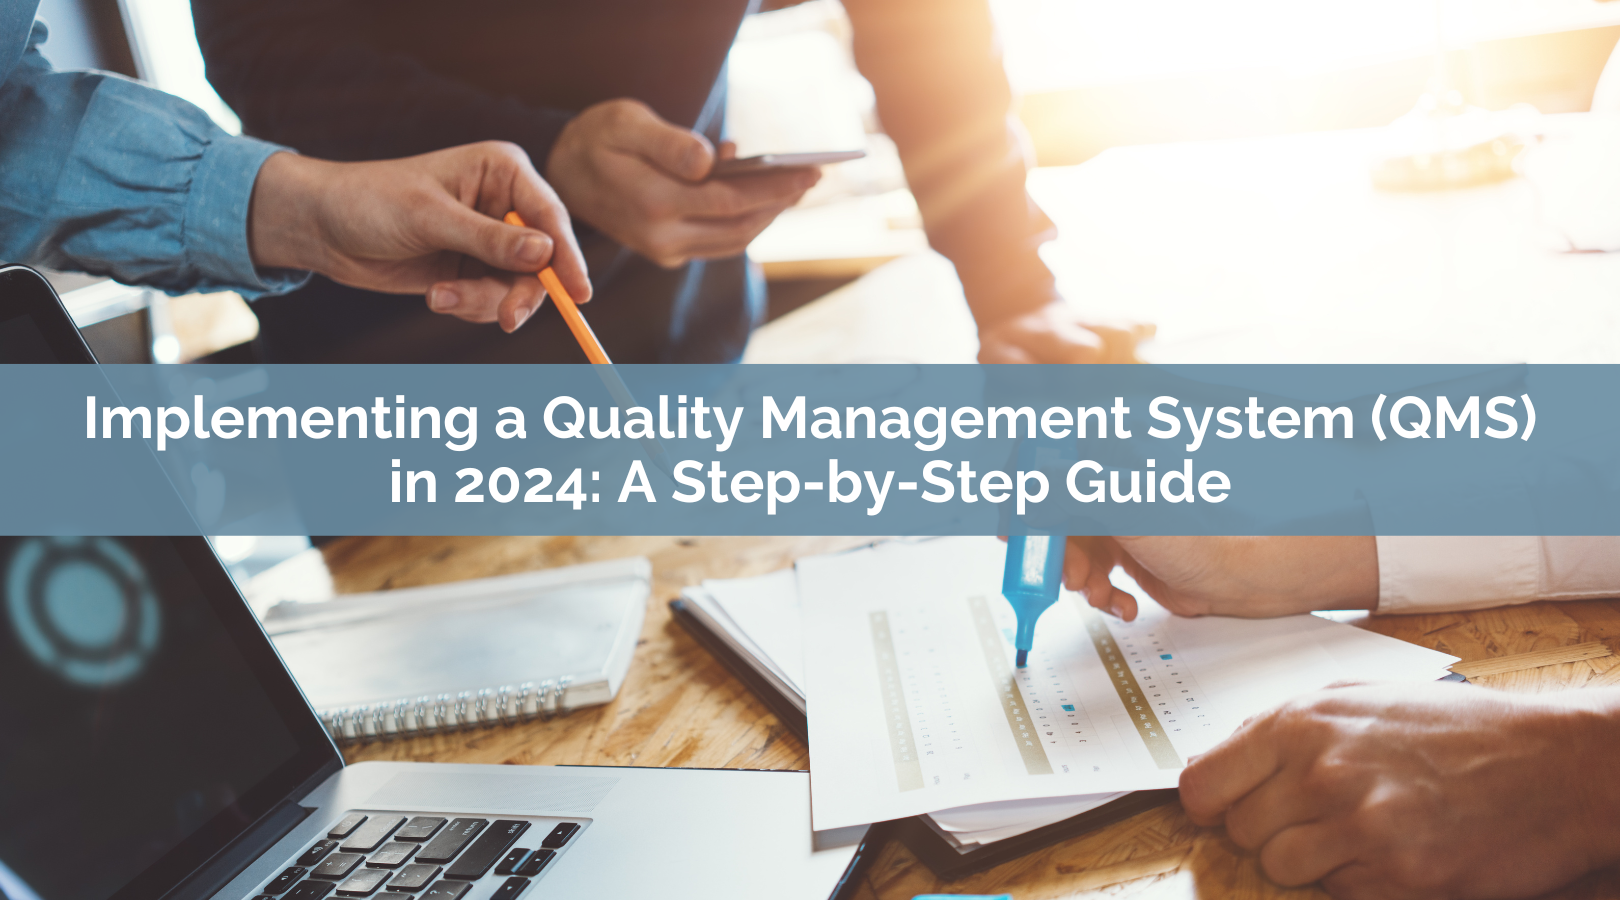 Implementing a Quality Management System (QMS) in 2024: A Step-by-Step Guide